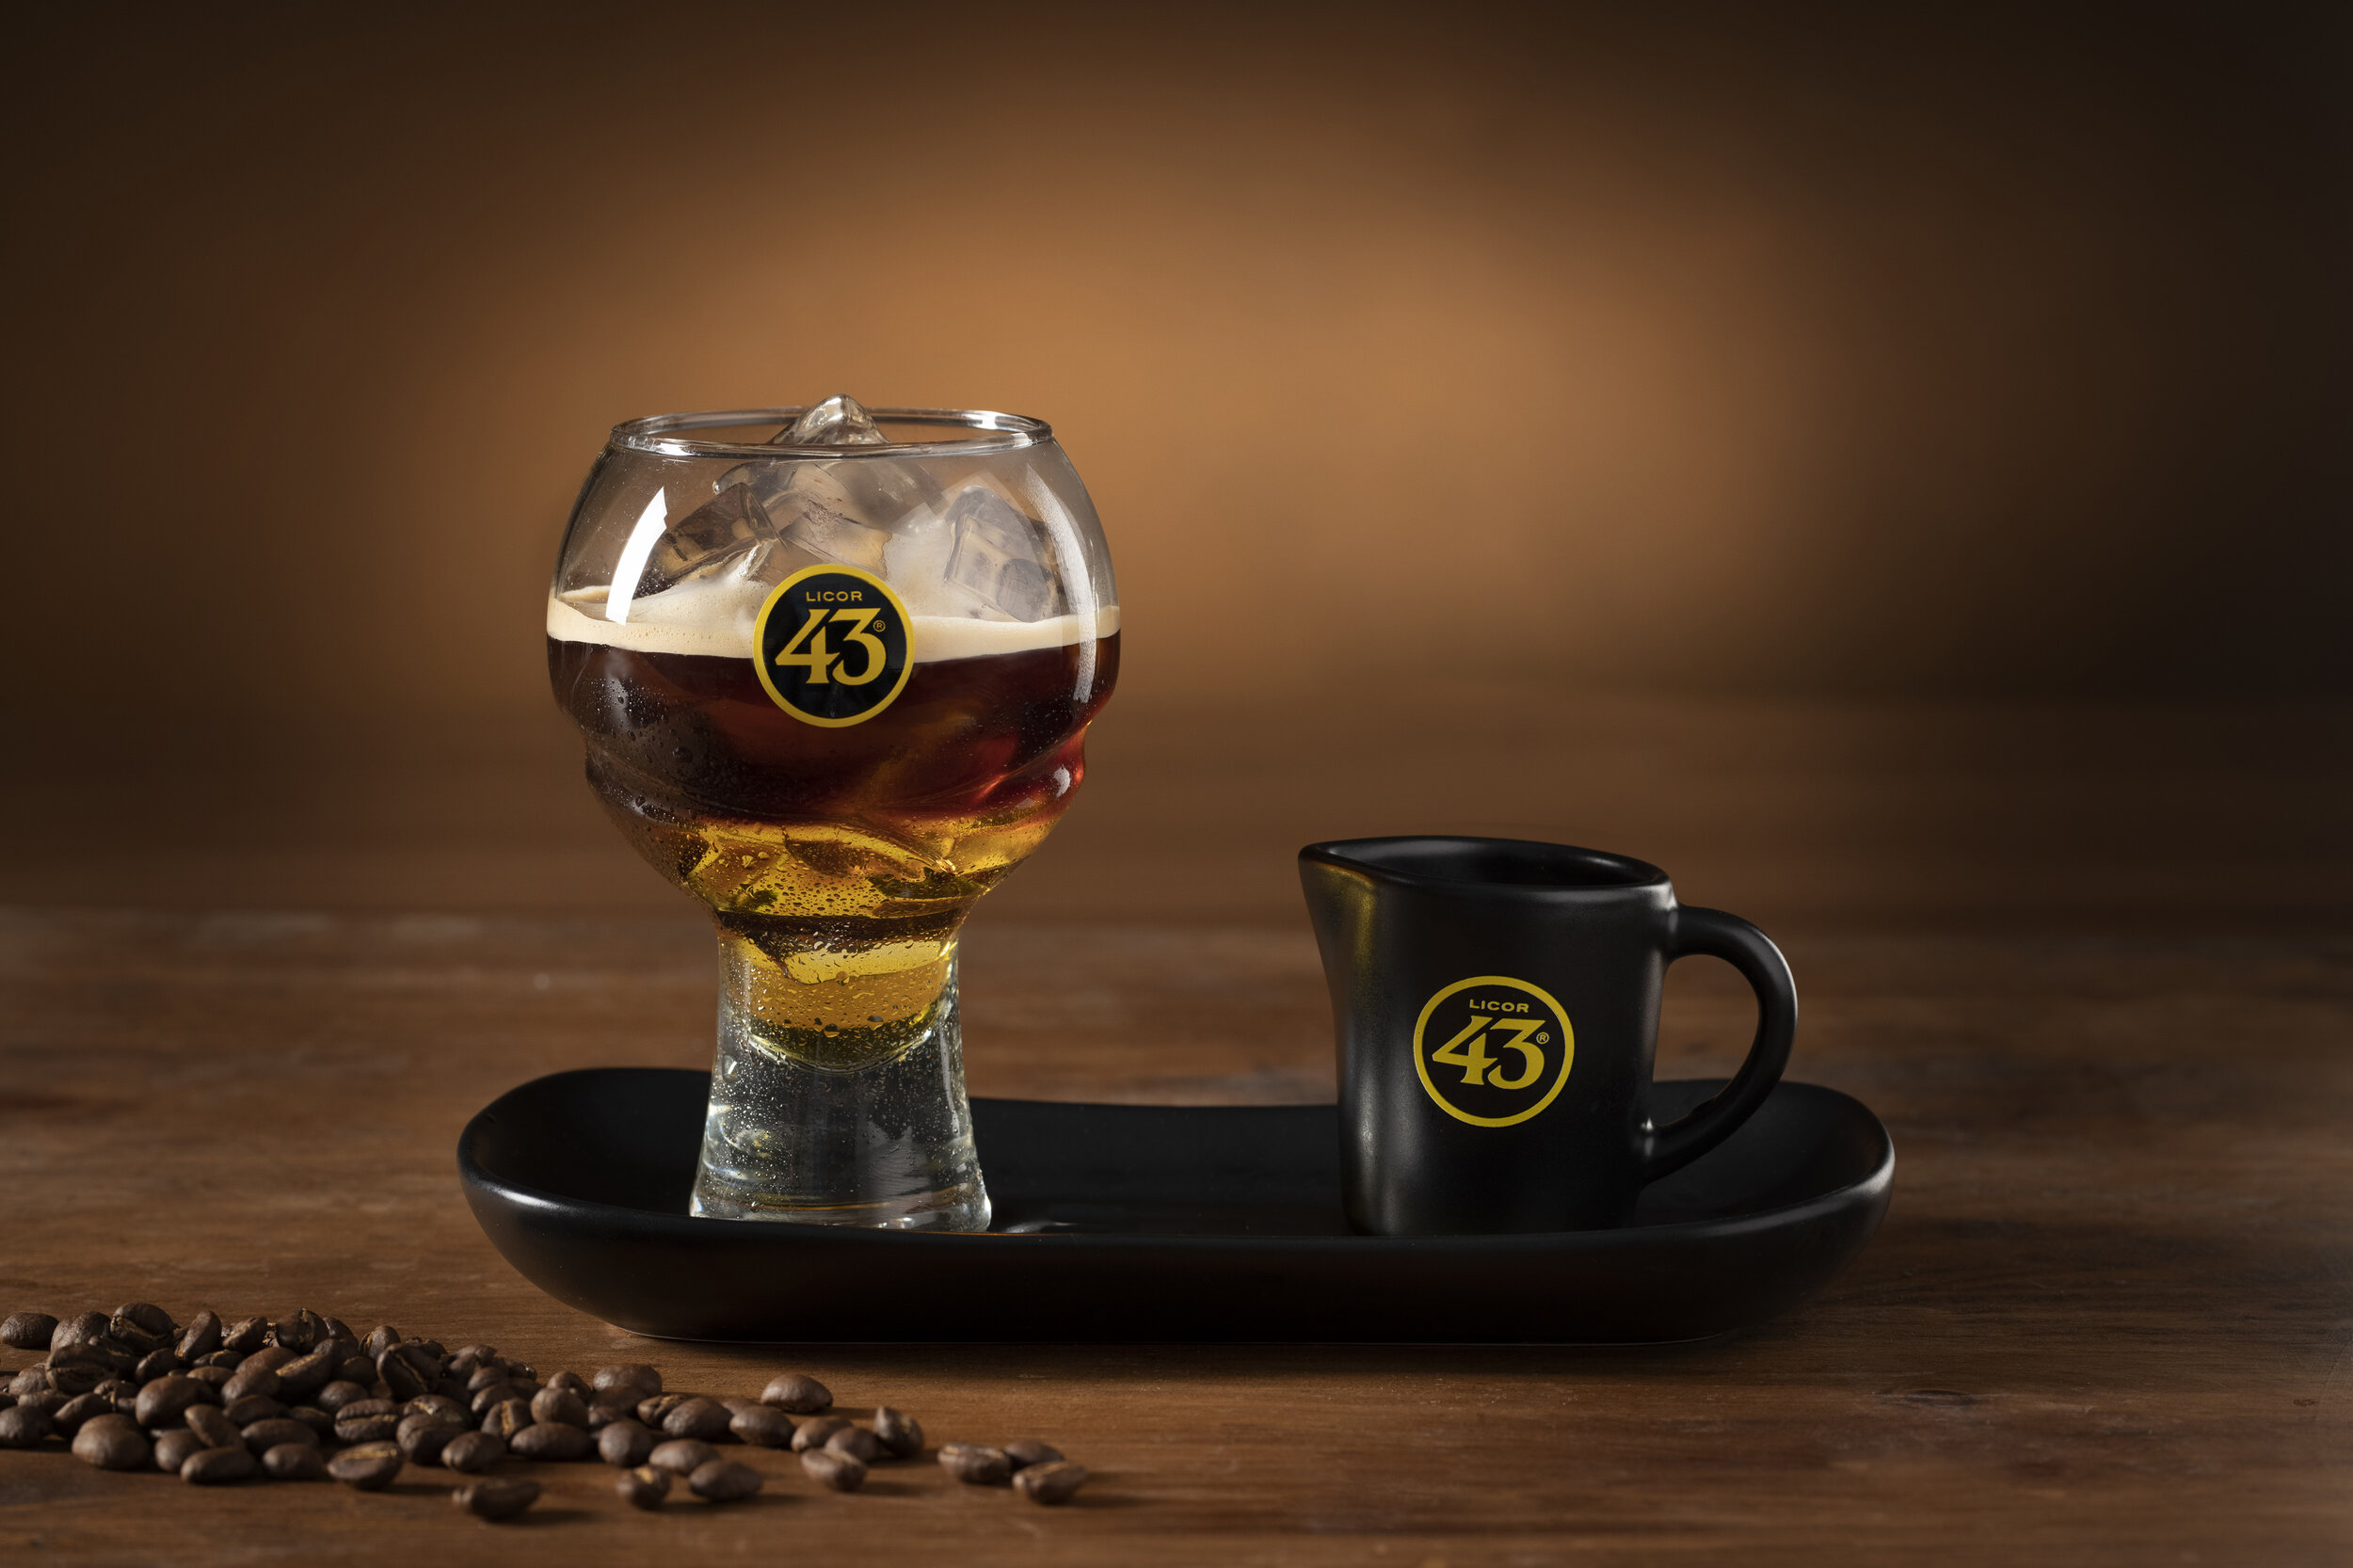 Deja Brew: Meet Bartenders Coffee the the of & 43 Winning Licor — Baristas Association Cocktail Challenge Specialty